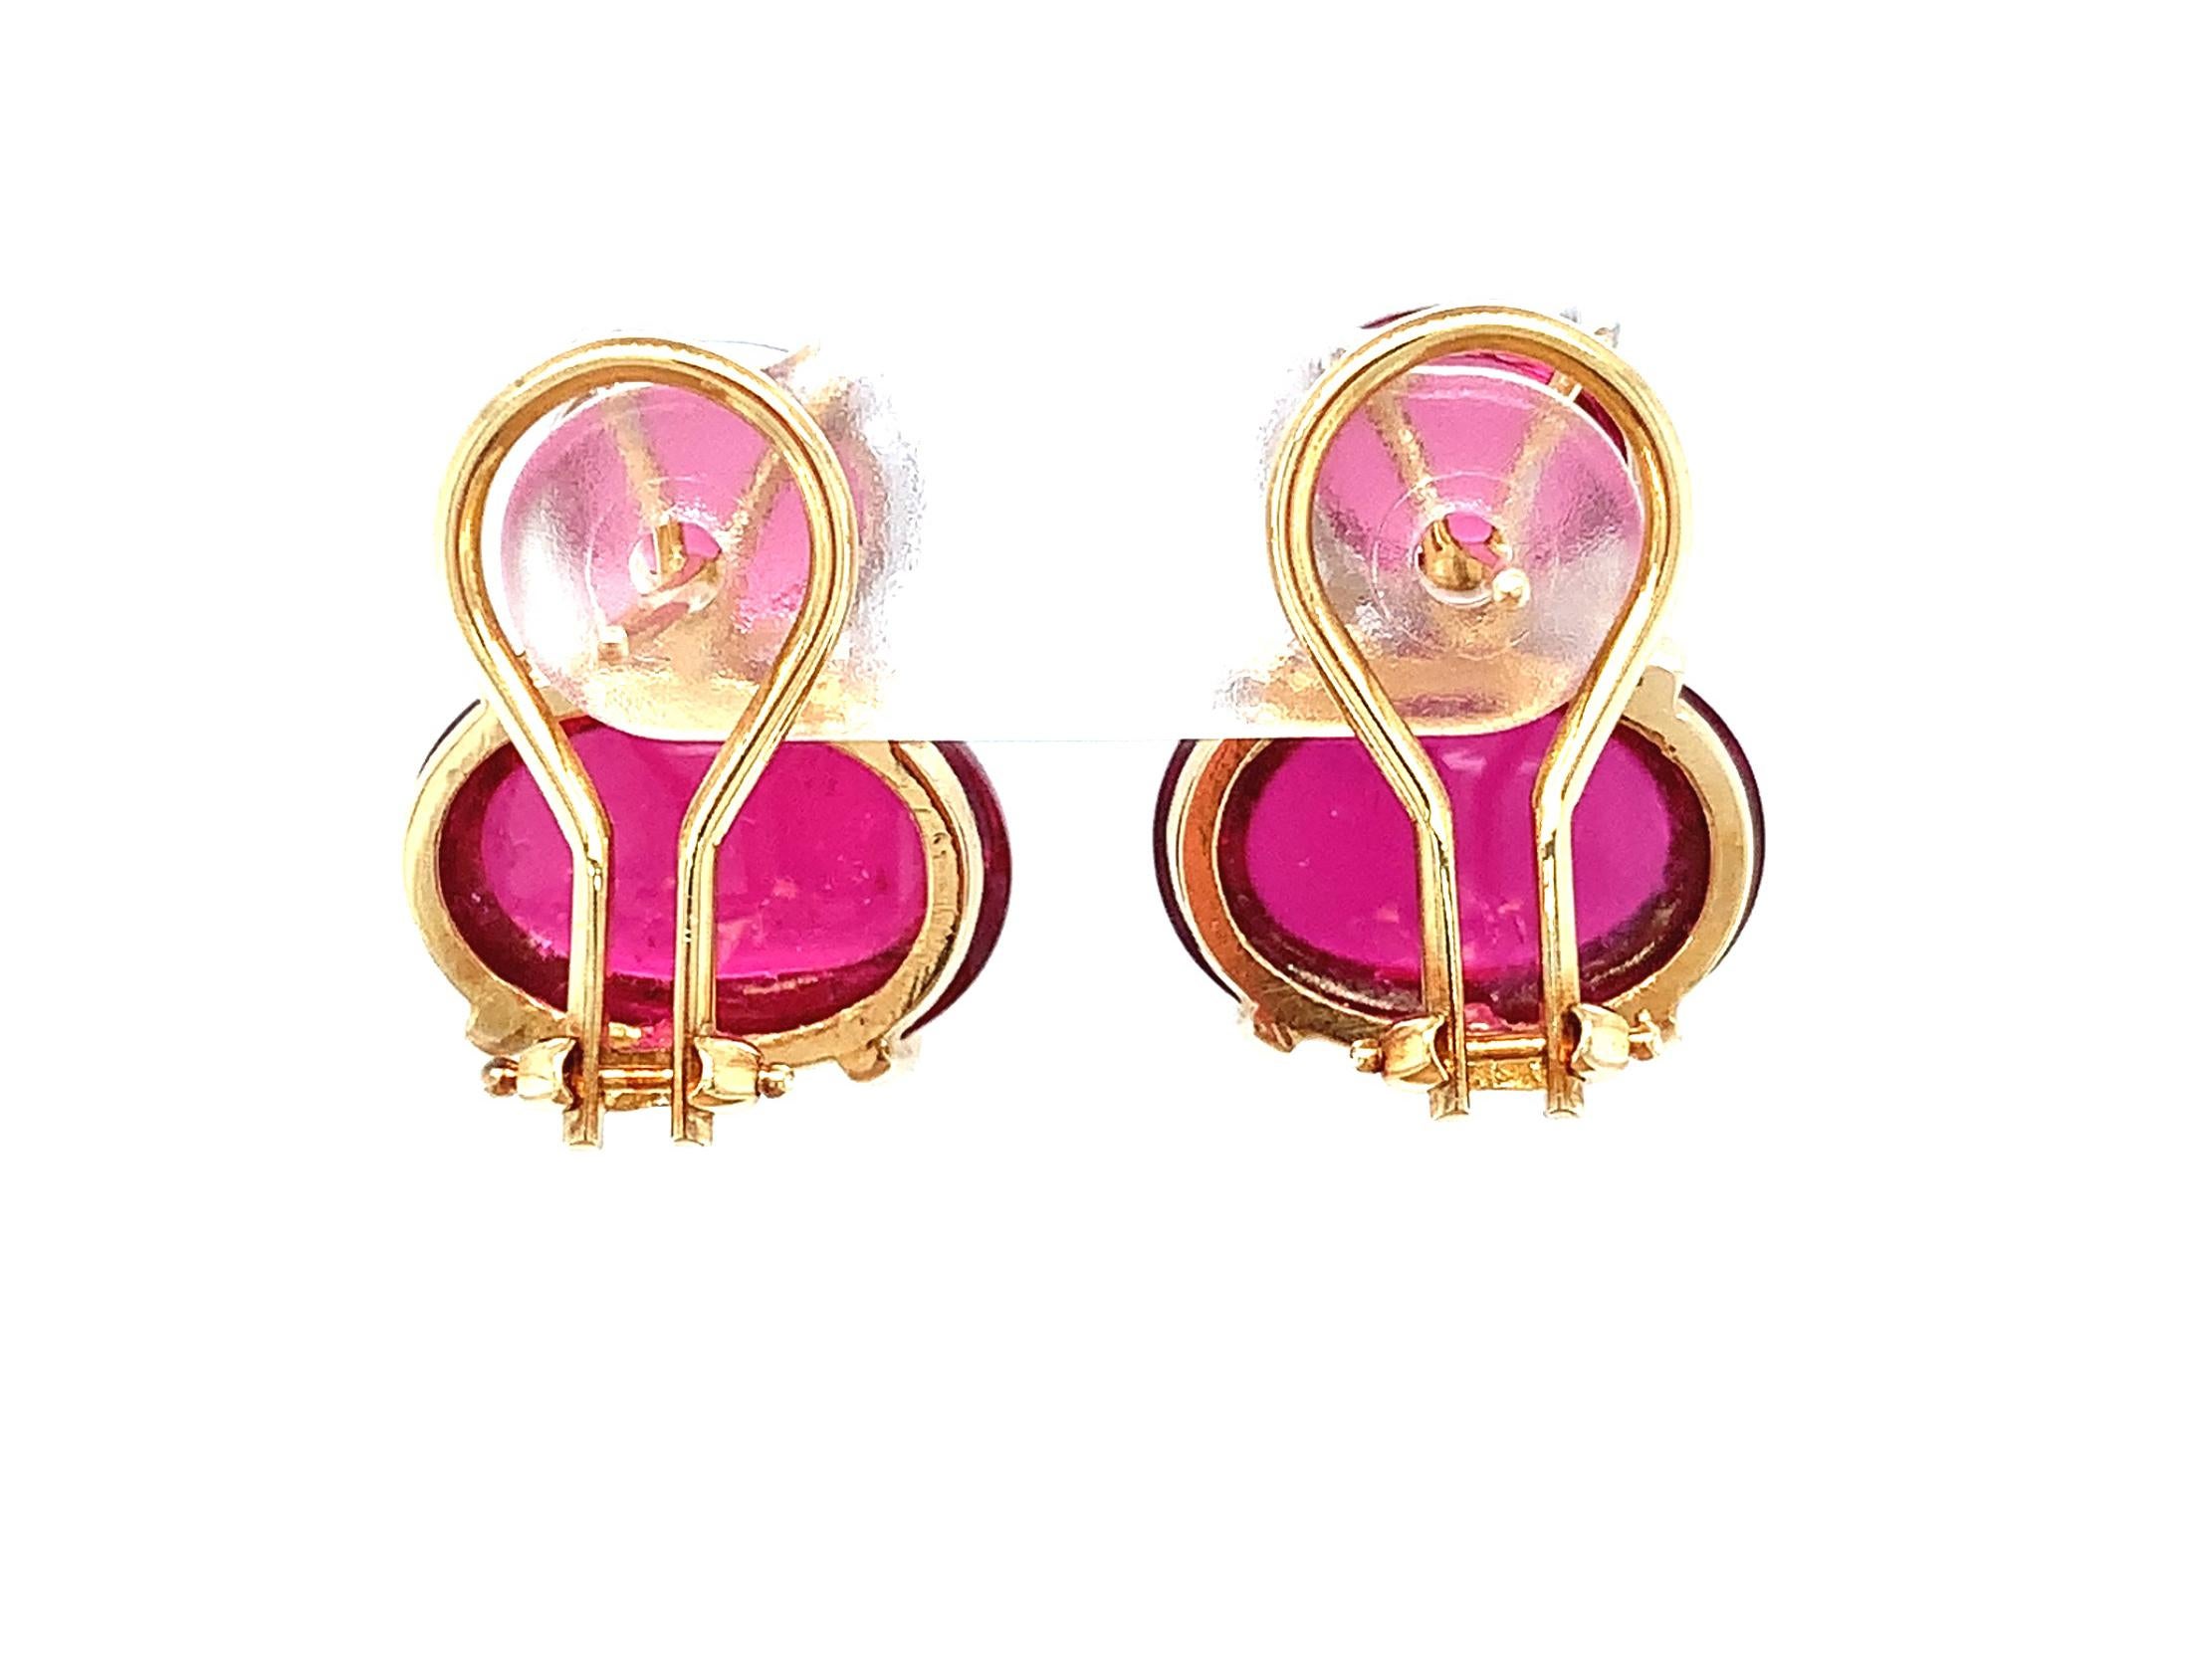 17.21 Carat Rubellite Tourmaline Cabochon Yellow White Gold French Clip Earrings 1